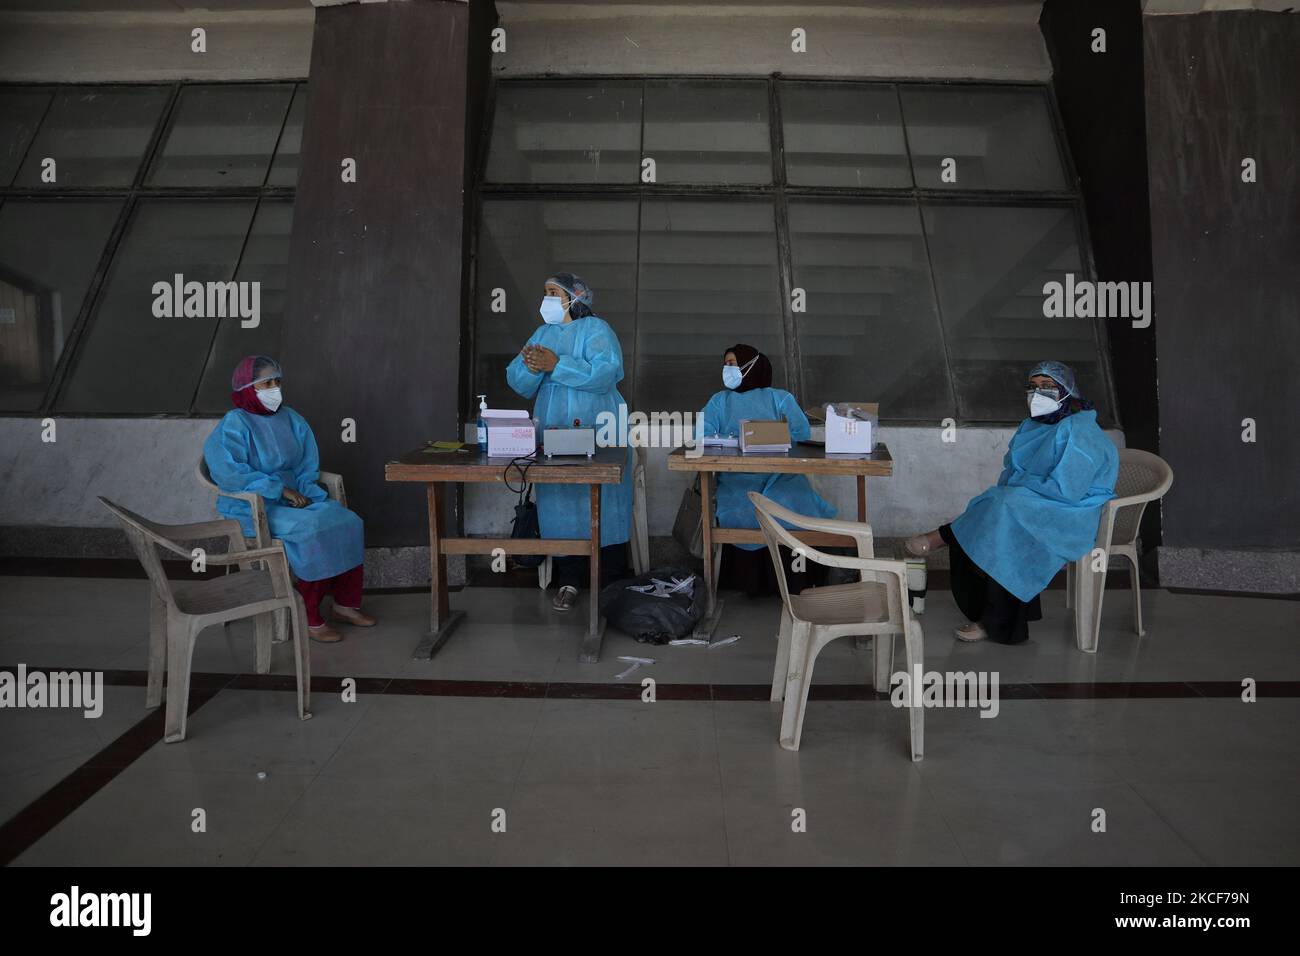 Health workers wait for people at a makeshift health center in Srinagar, Indian Administered Kashmir on 25 May 2021. India recorded below 2,00,000 covid-19 cases lowest in last 40 days. 3260 deaths were reported across India in last 24 hours. (Photo by Muzamil Mattoo/NurPhoto) Stock Photo